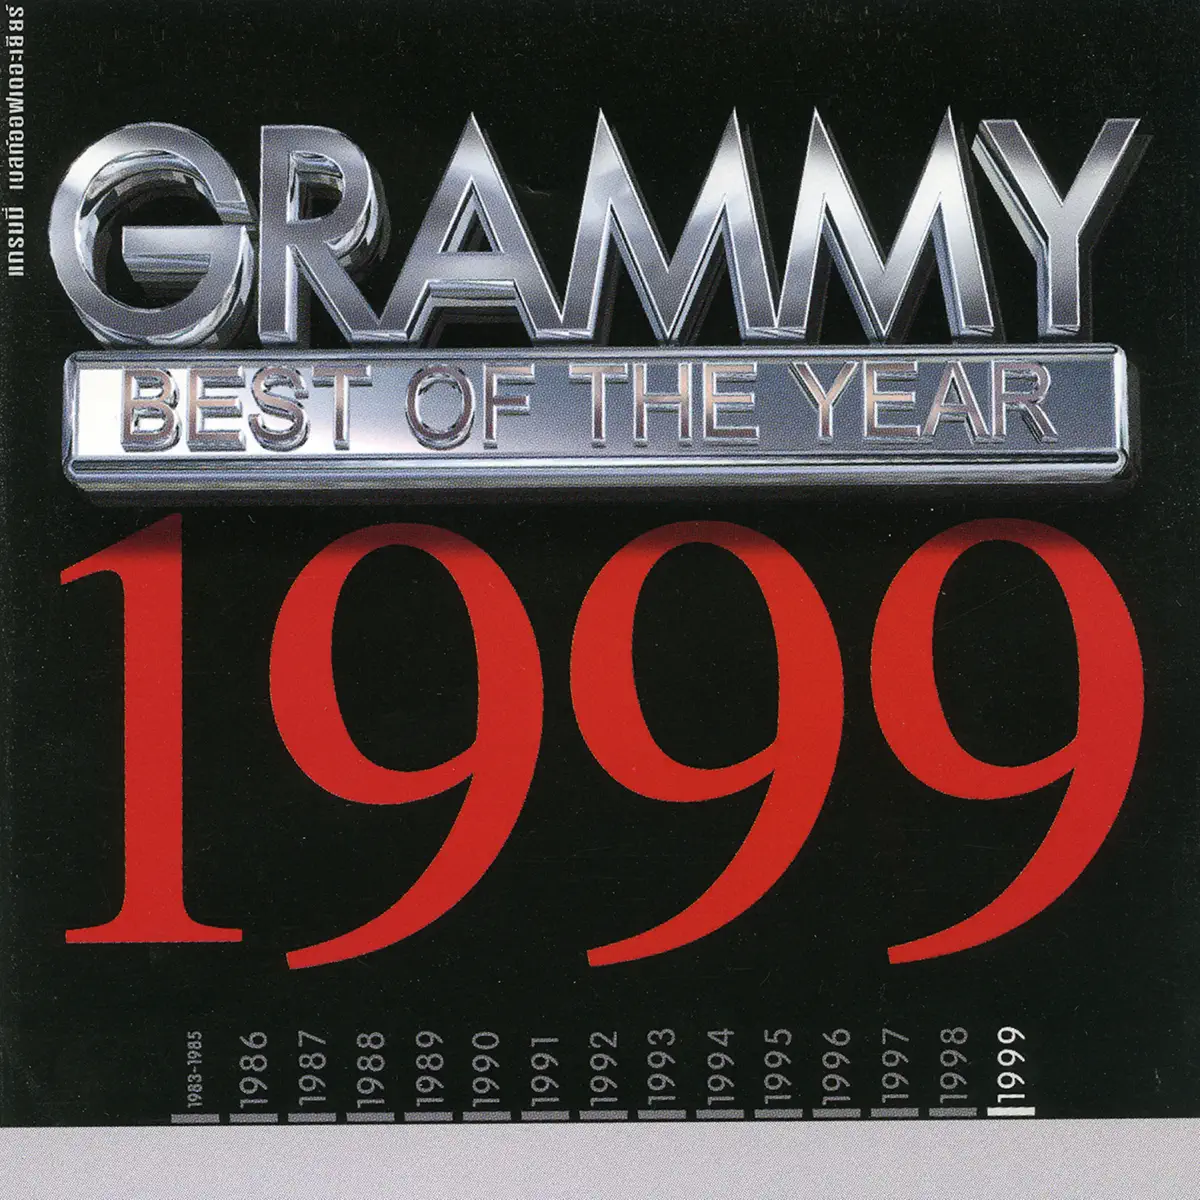 Various Artists - GMM Grammy Best of the Year 1999 (2001) [iTunes Plus AAC M4A]-新房子